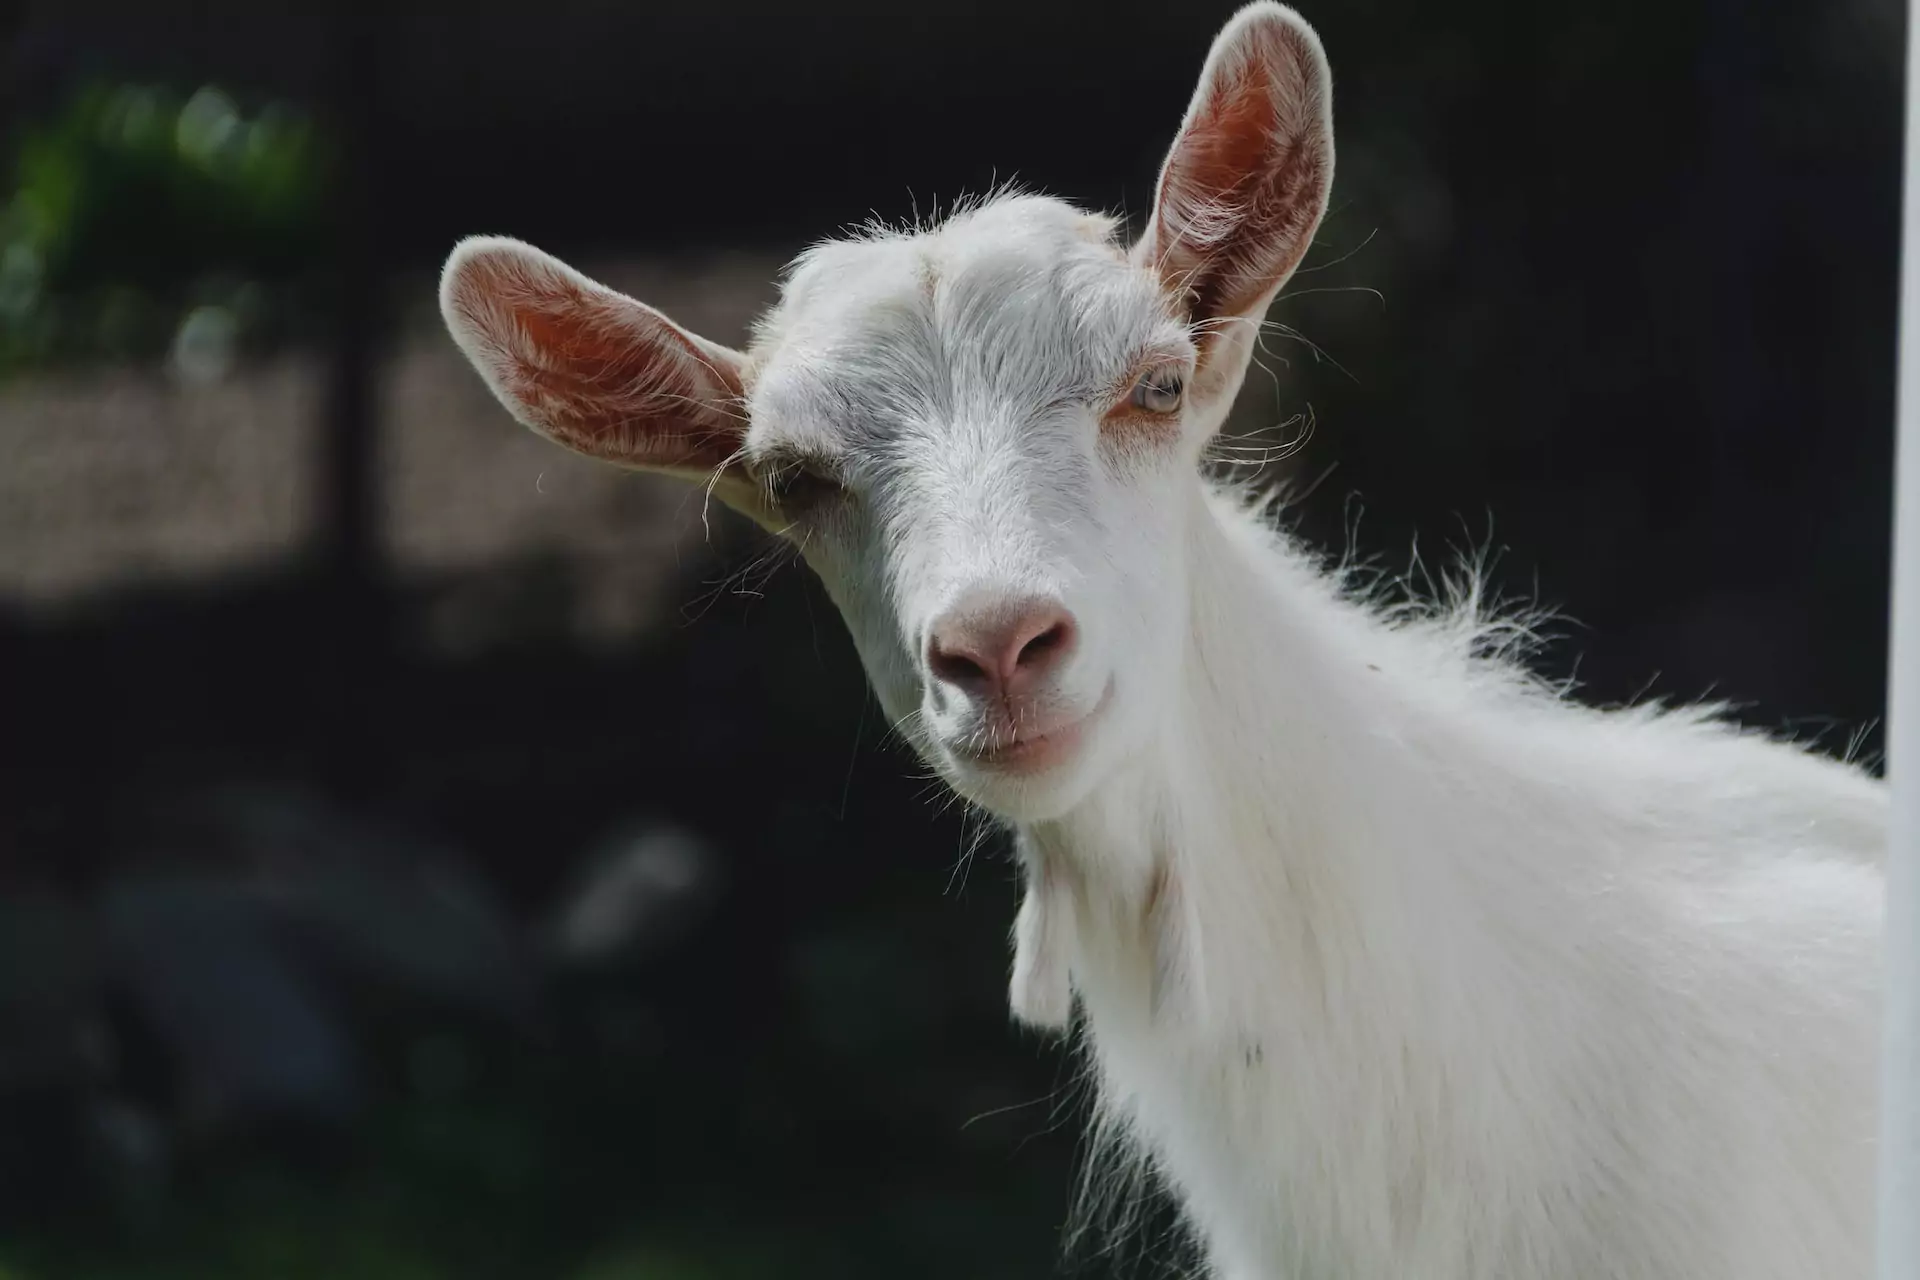 Goat with white fur